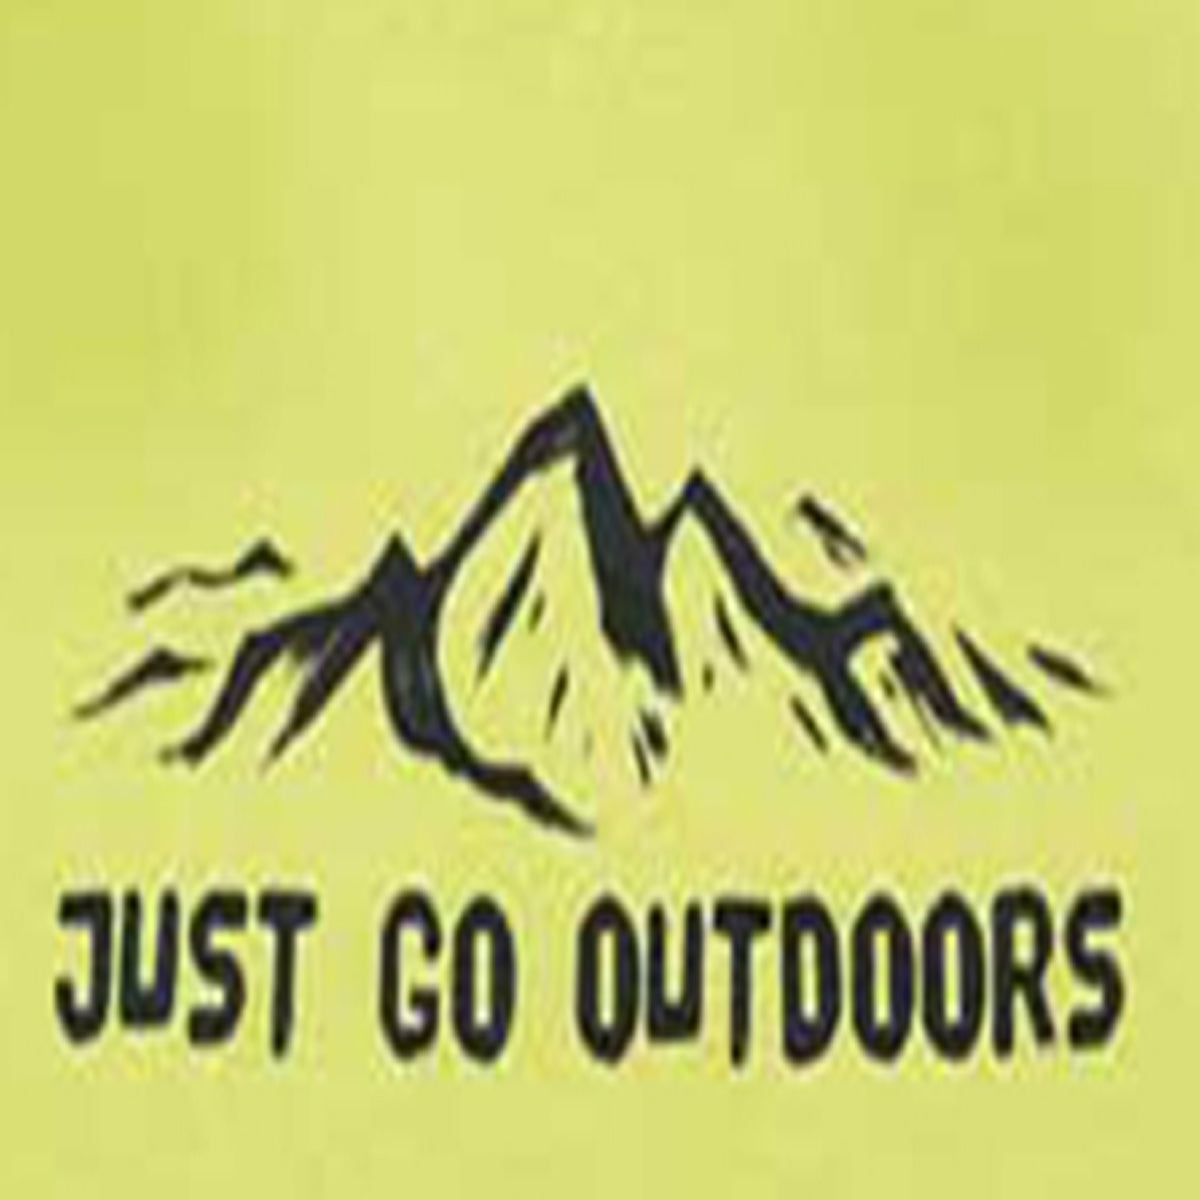 Boys Neon Yellow 'Just Go Outdoors' Graphic T-Shirt - HipHopps Adventure Tee